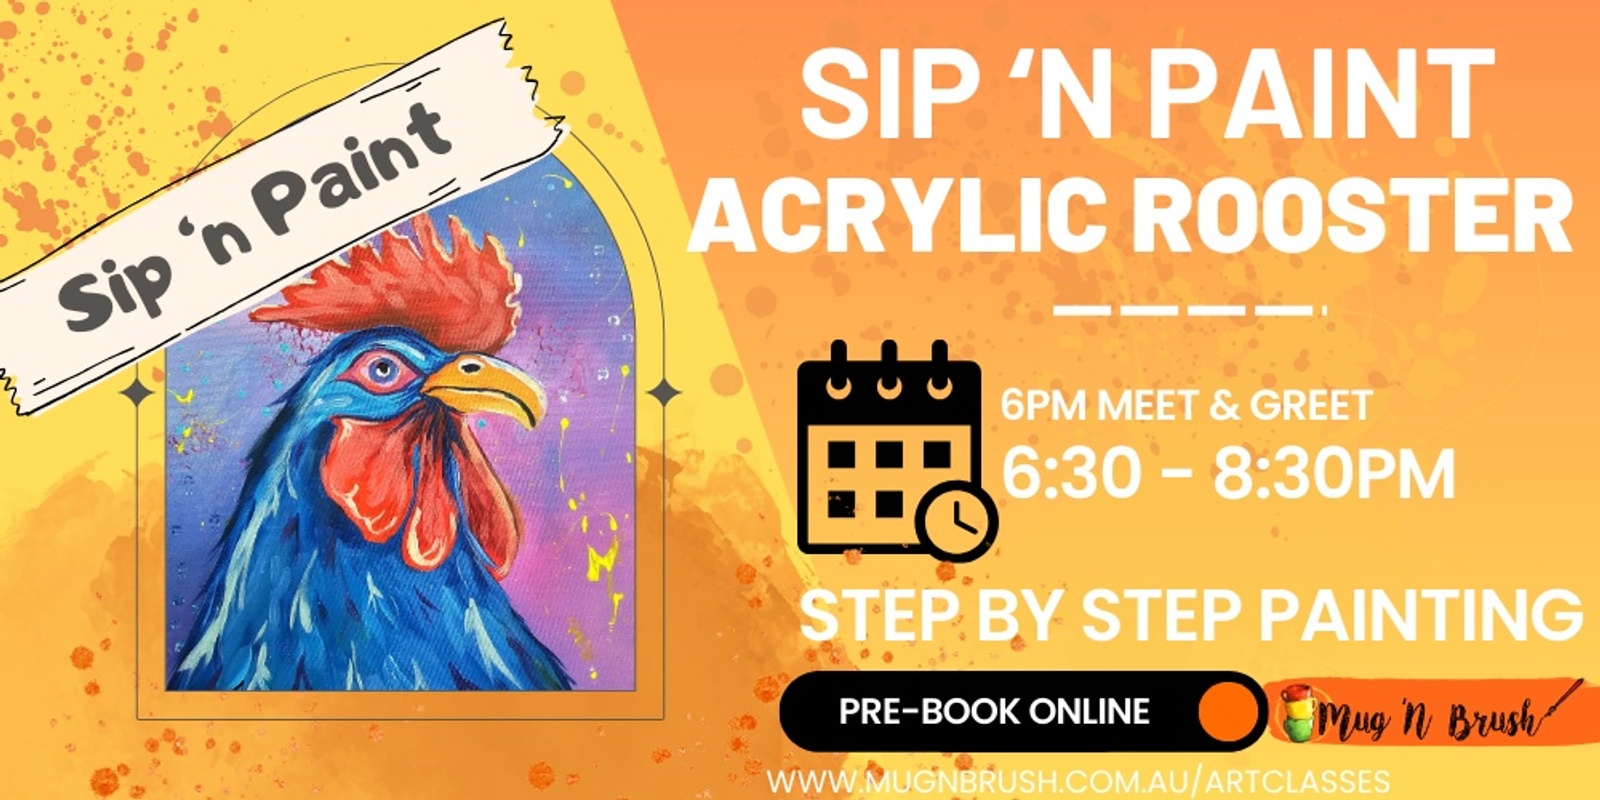 Banner image for Sip 'n Paint - Adults Acrylic Art class Rooster